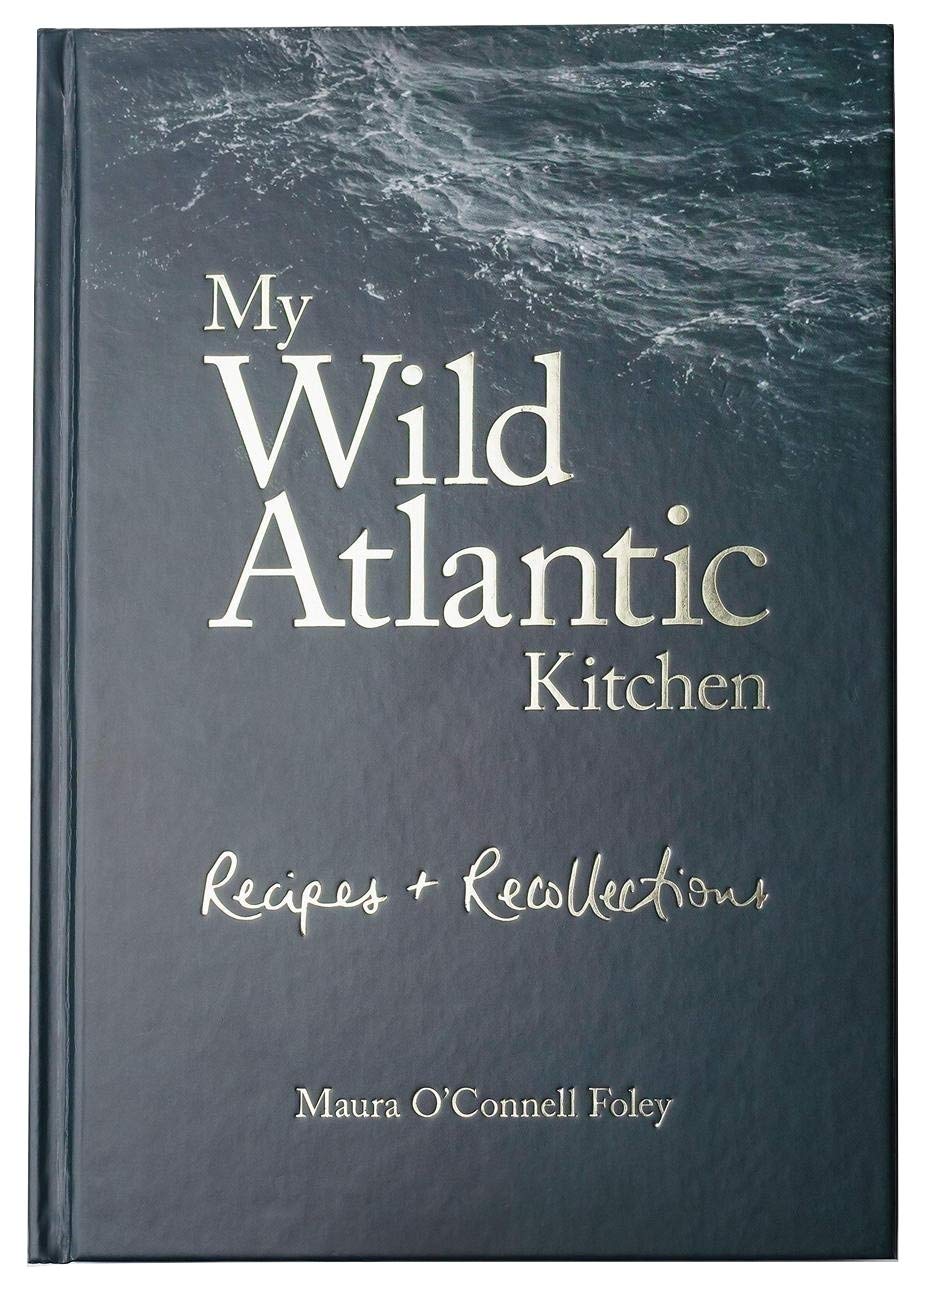 My Wild Atlantic Kitchen: Recipes and Recollections (Maura O'Connell Foley)